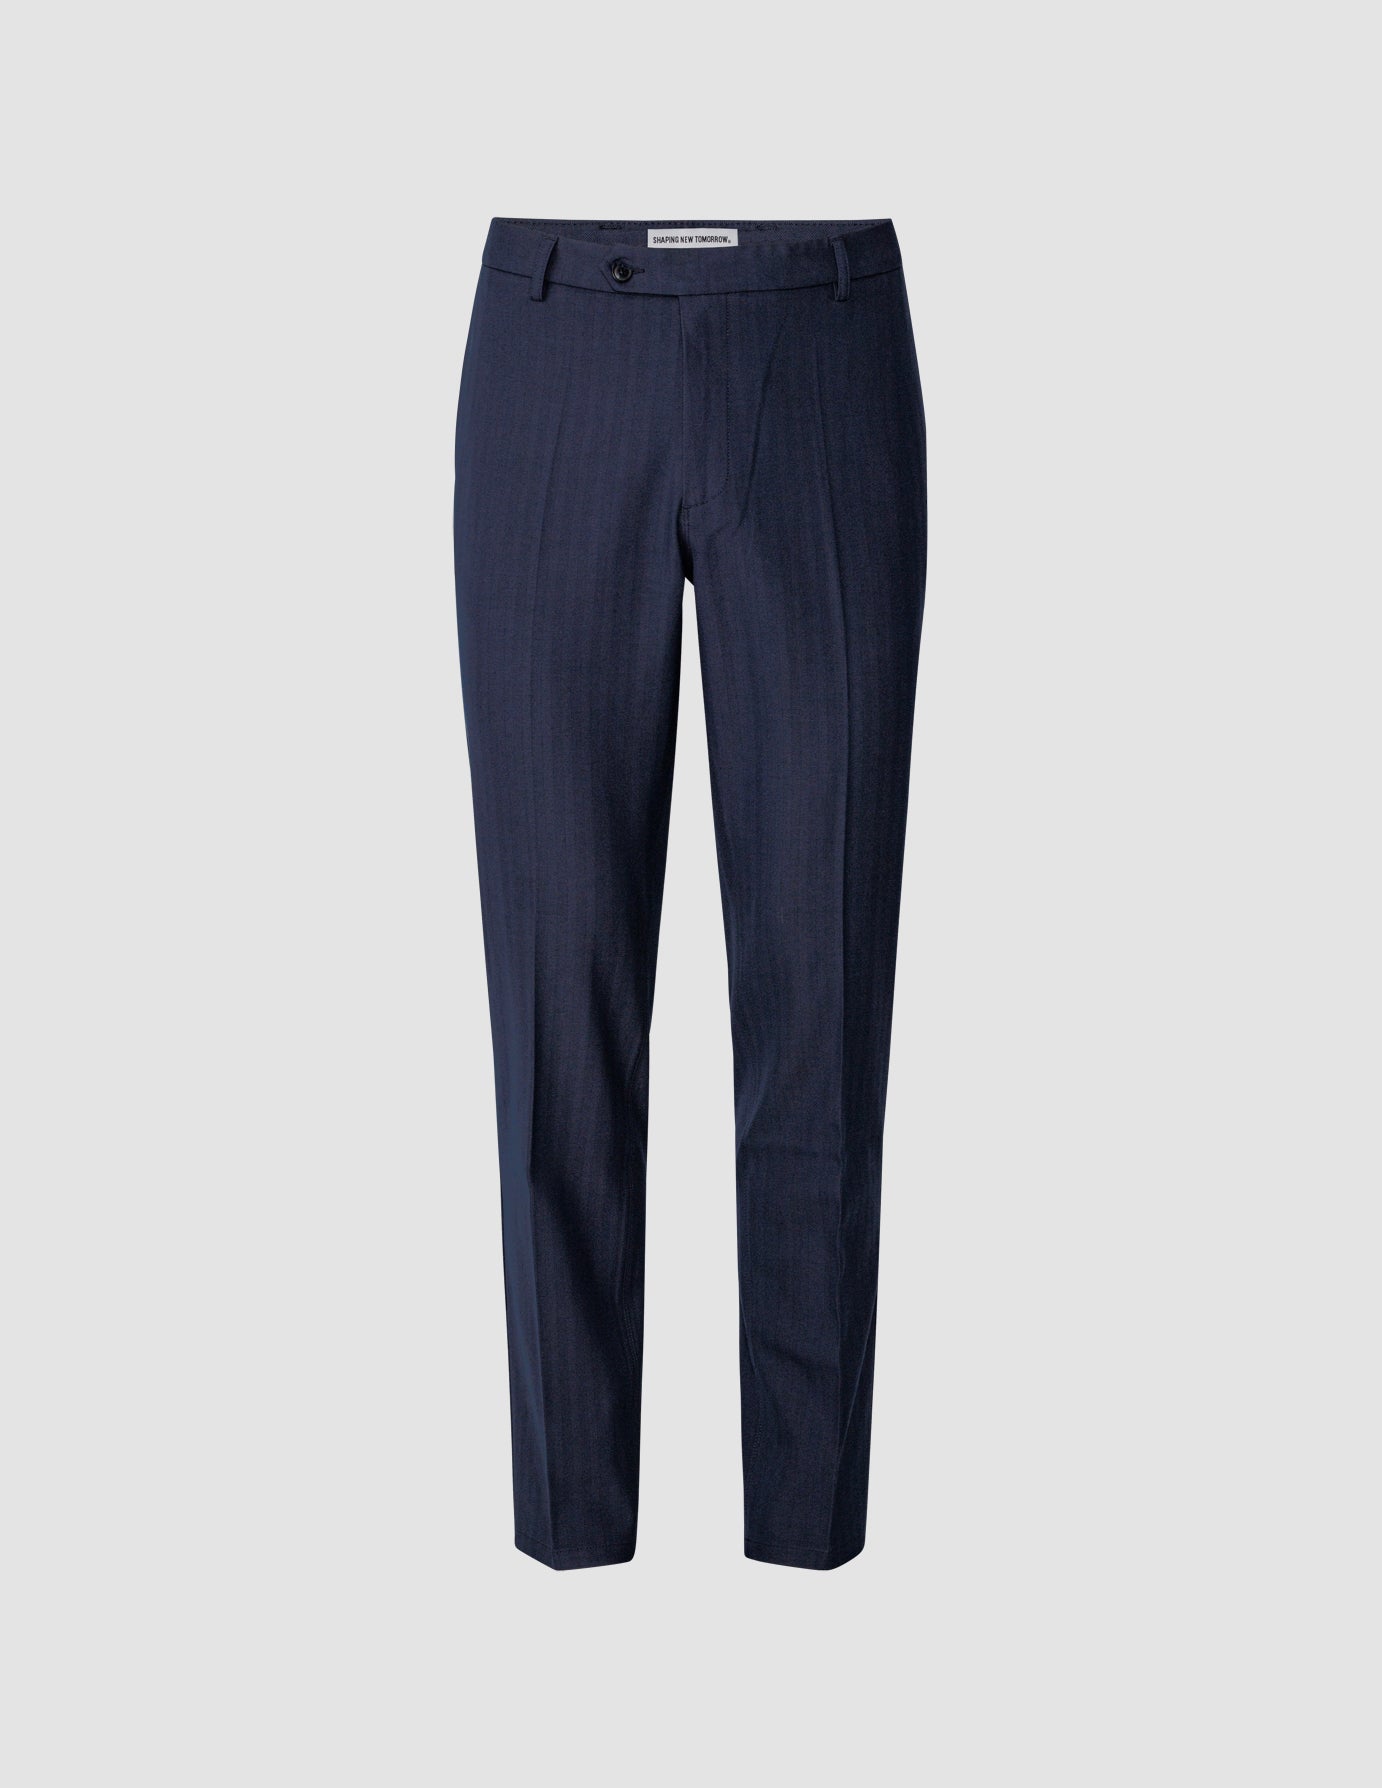 Navy blue essential Trousers